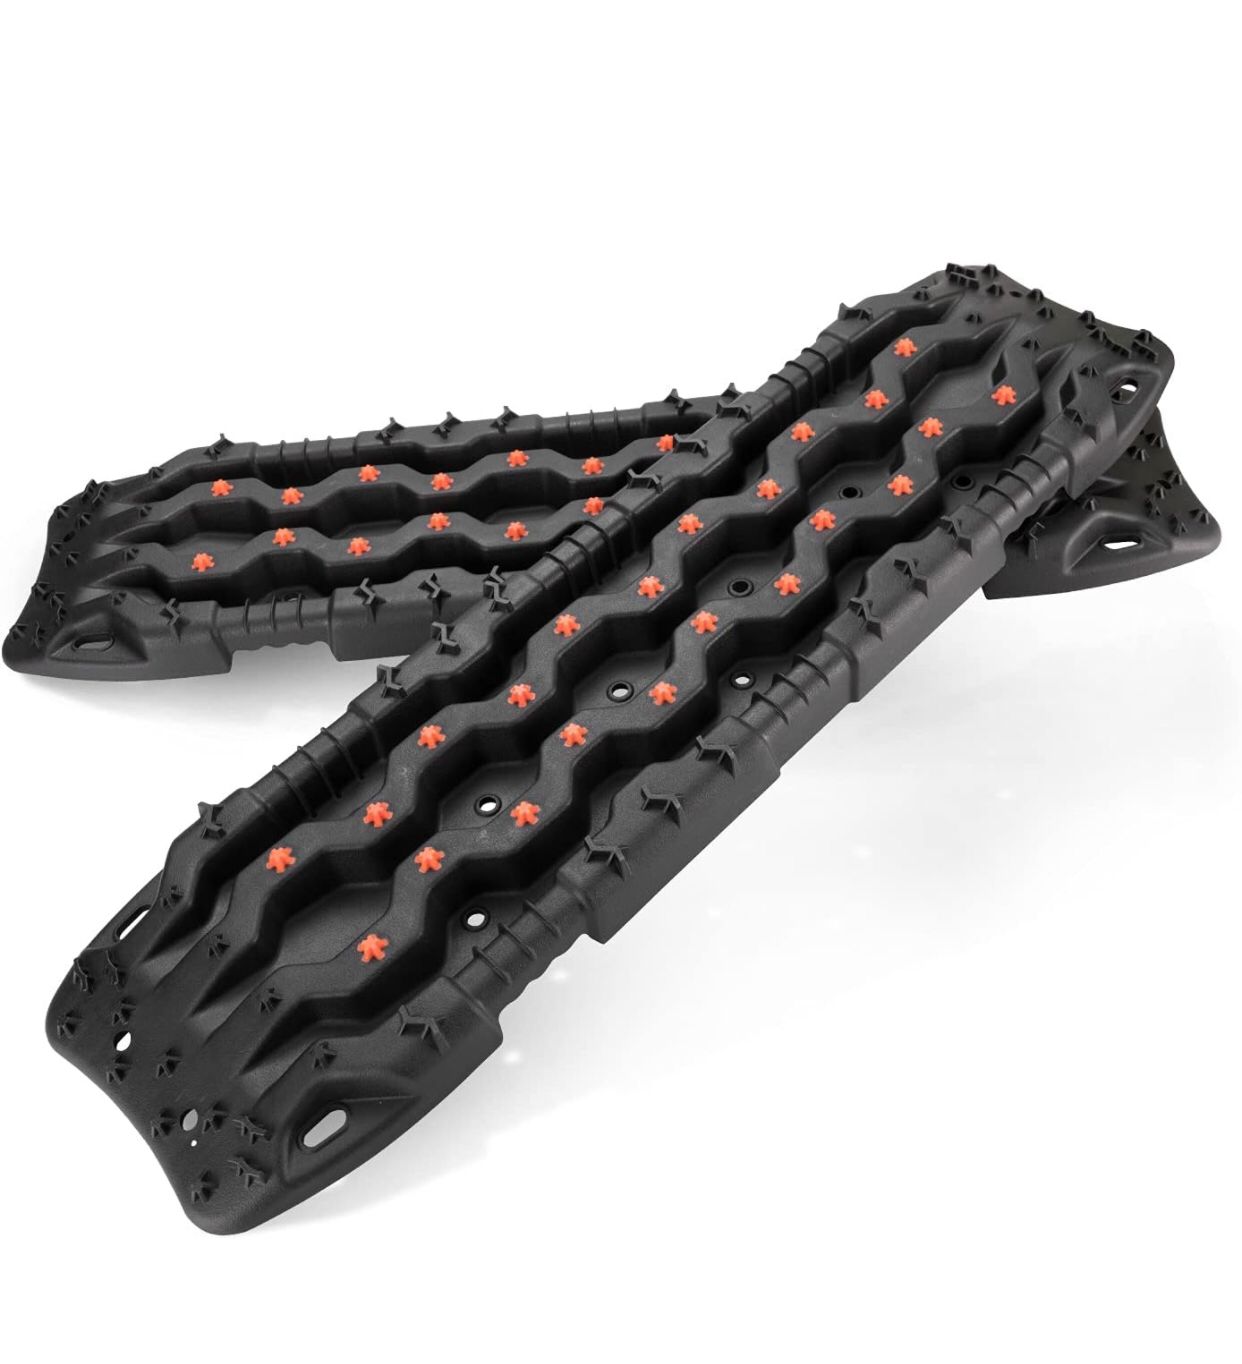 2x All-Terrain Traction Boards for Sand, Mud, Snow & More (Black & Red)